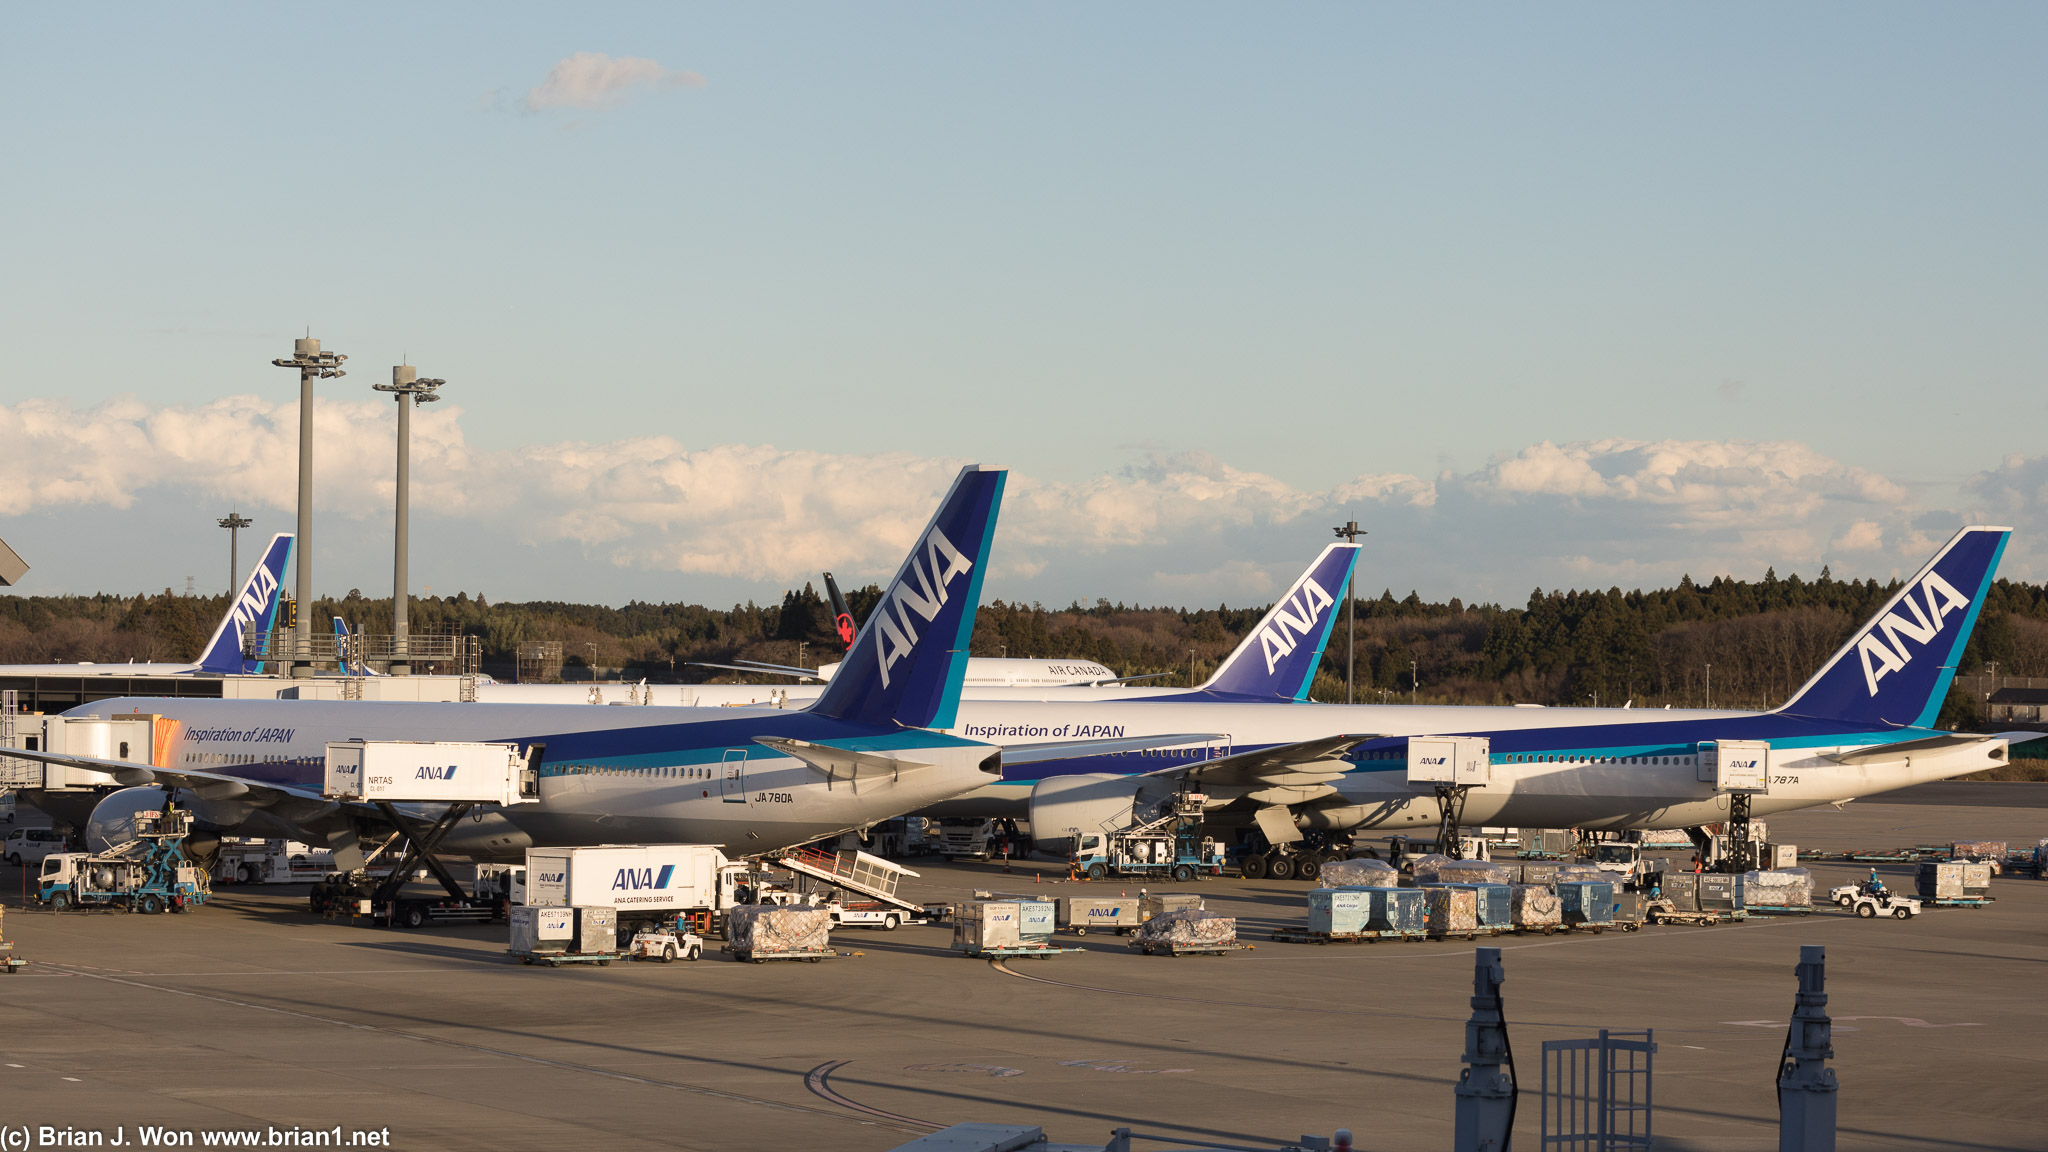 ANA 777-300ER's. With an Air Canada one hiding in the background.